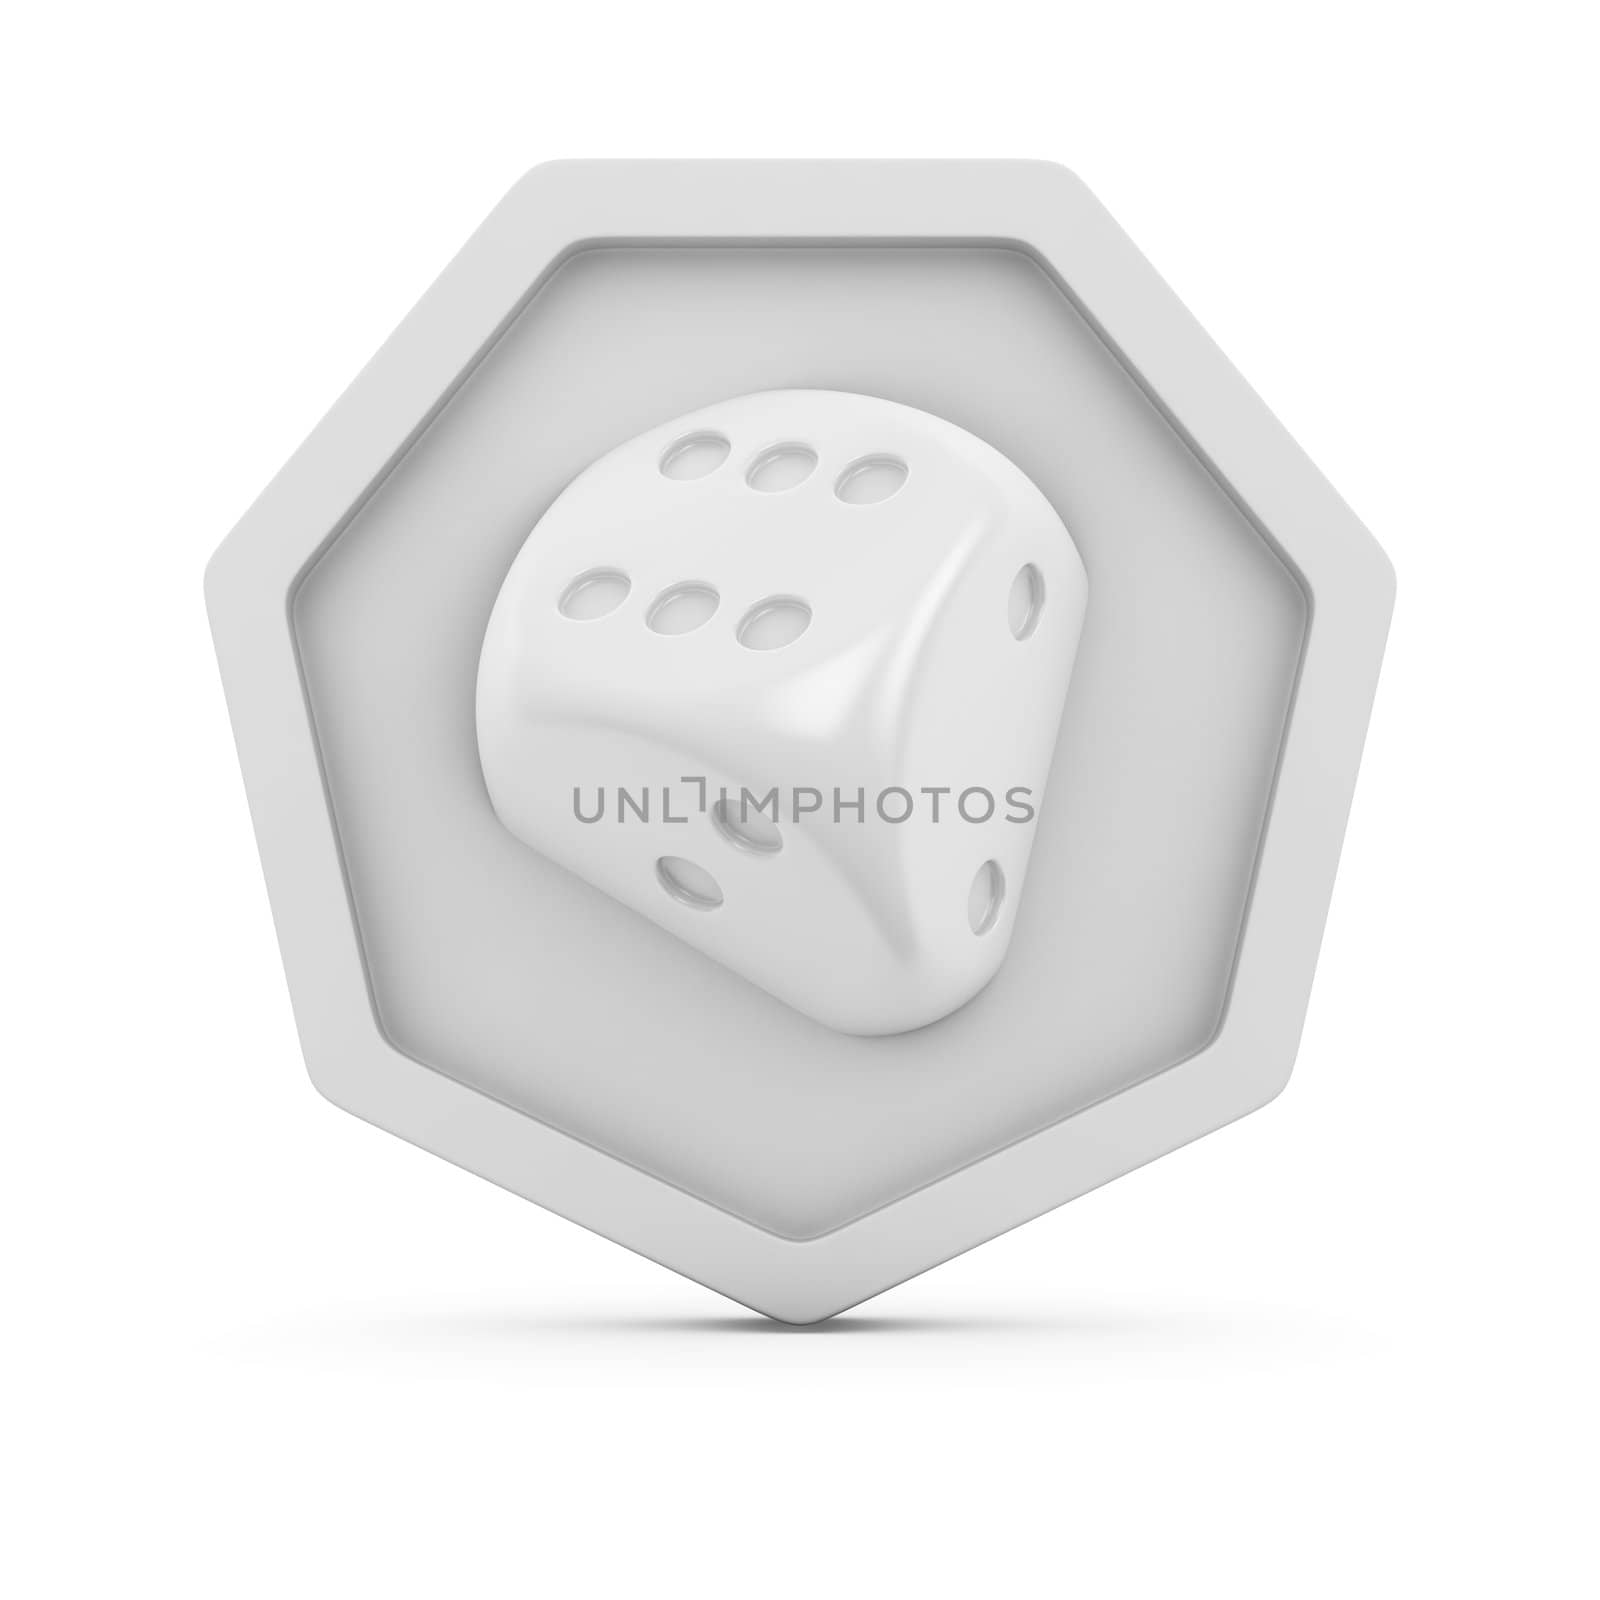 Image of dice on the white badge